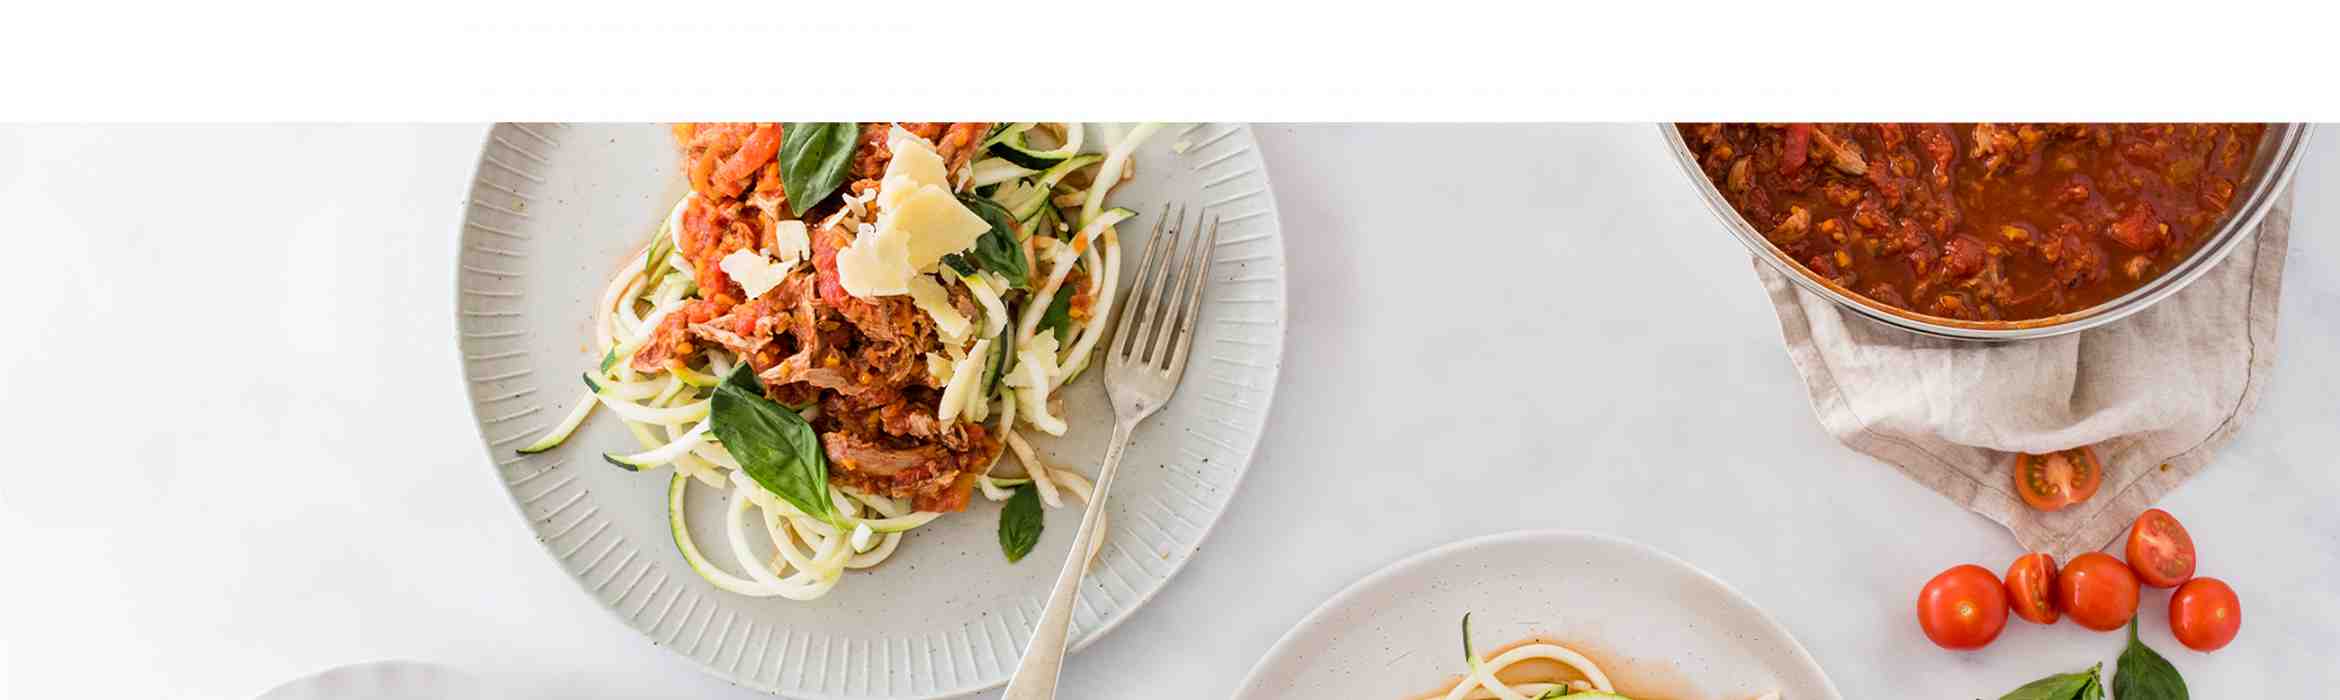 Slow Cooked Duck Breast Ragu with Zucchini Noodles Recipe